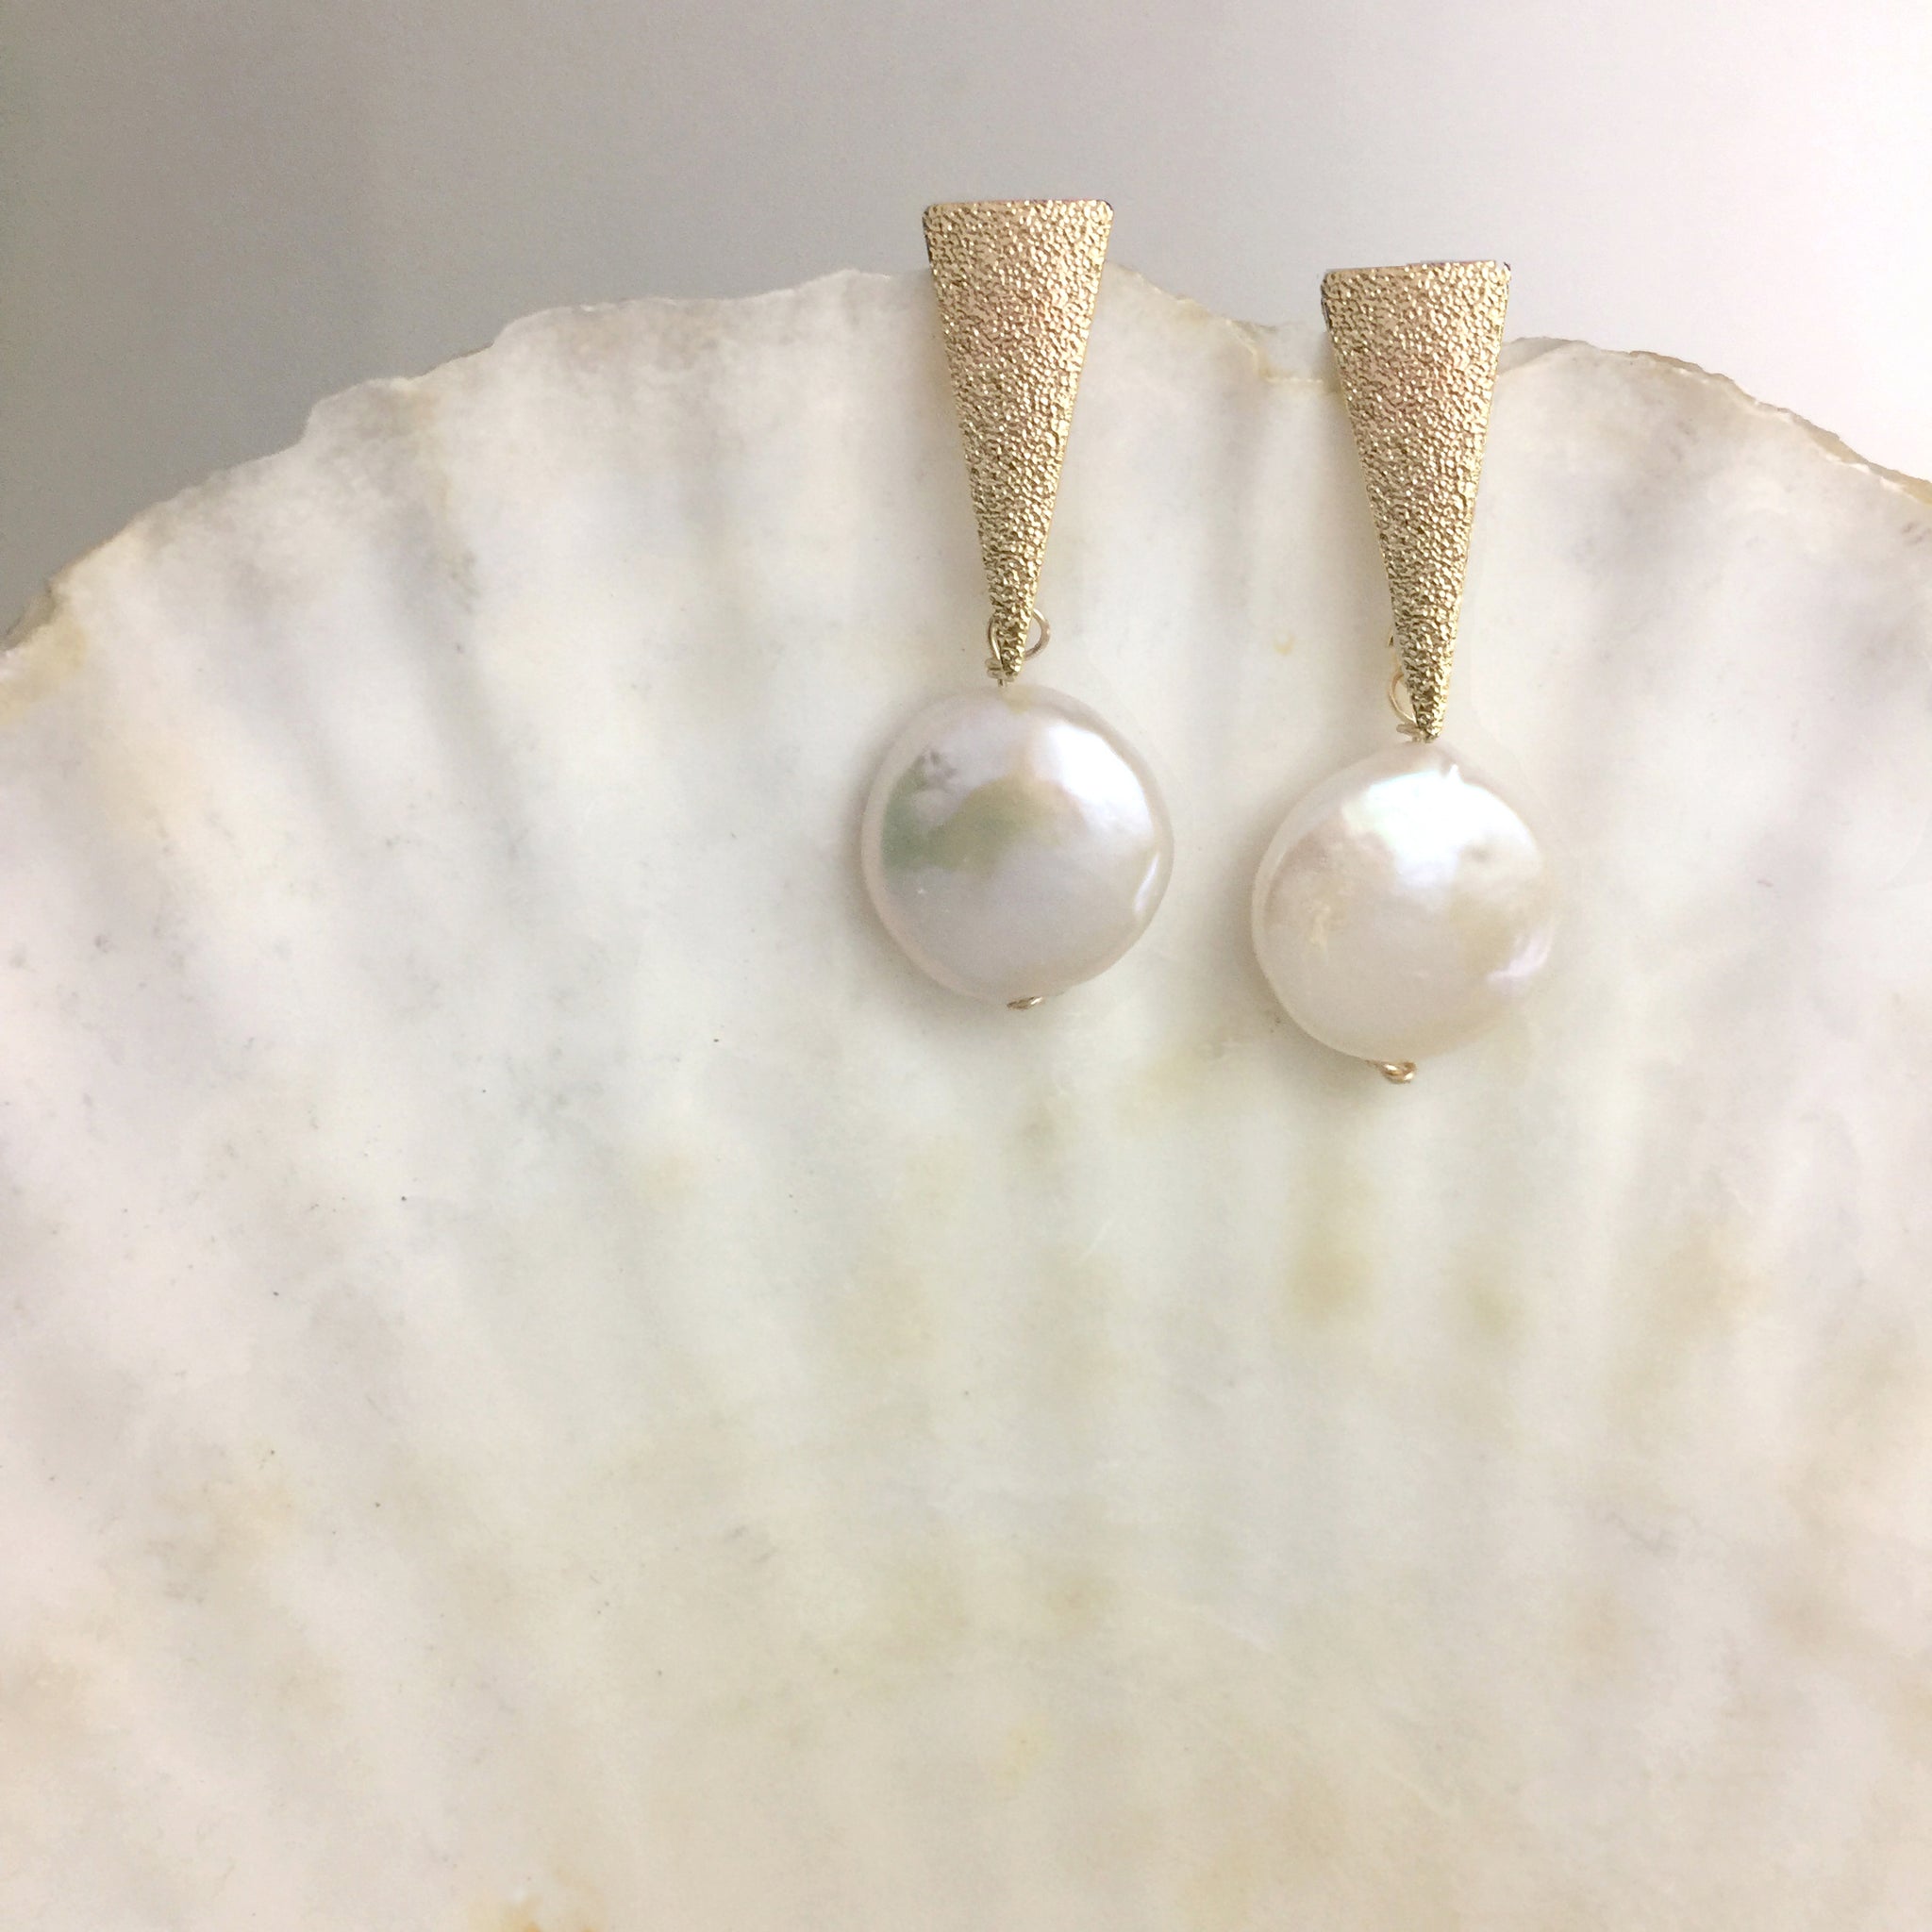 Pearl Earrings Drop Gold, Gift Ideas for Women, Natural Freshwater Coin Pearl Earrings